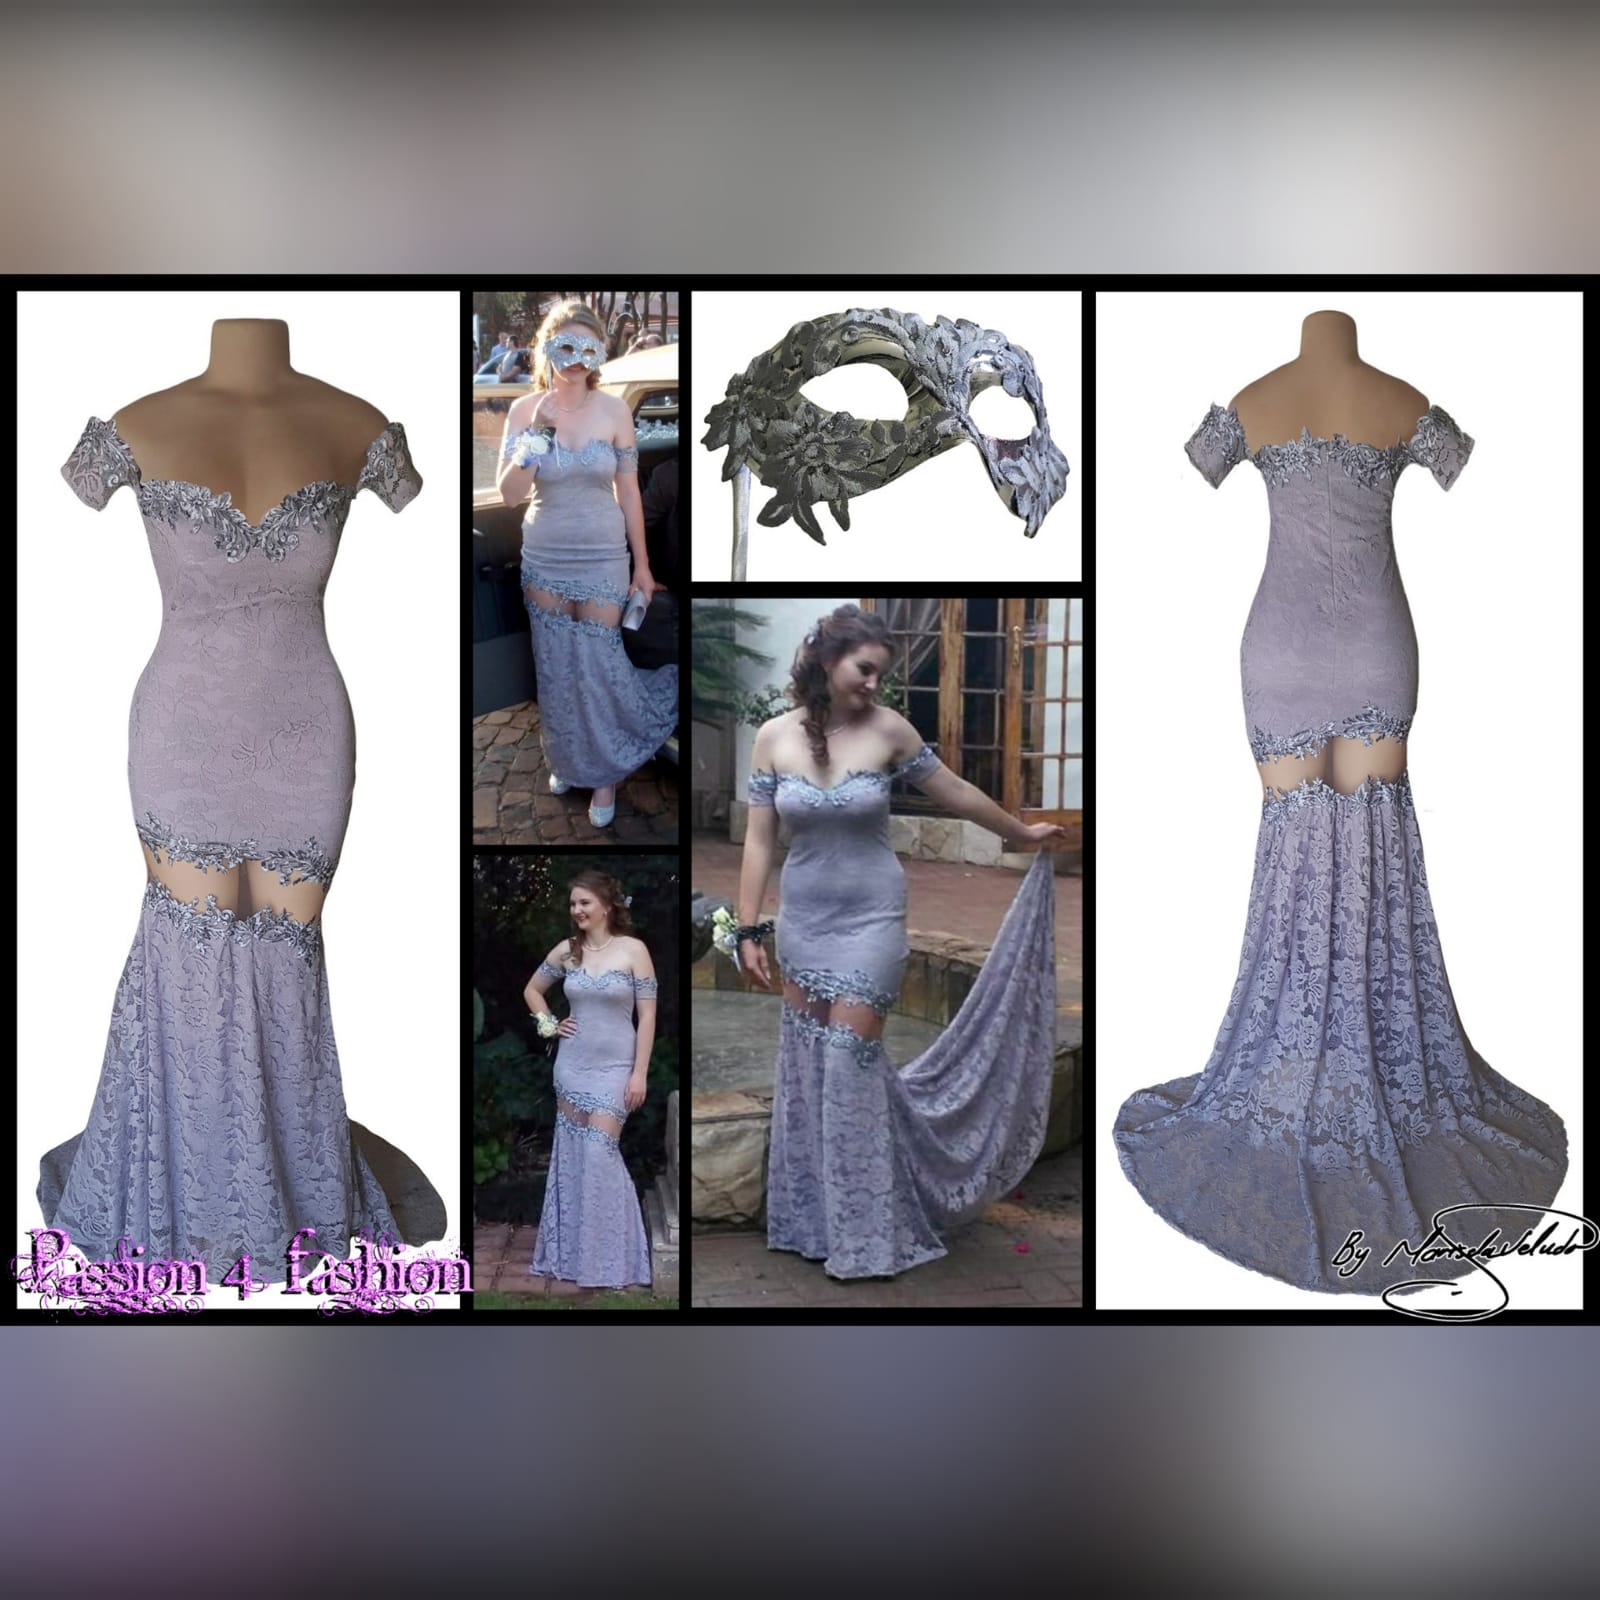 Light gray off shoulder fully laced prom dress 5 light gray off shoulder fully laced prom dress with an illusion knee design. Neckline and knee area detailed with silver lace. Dress with a train.